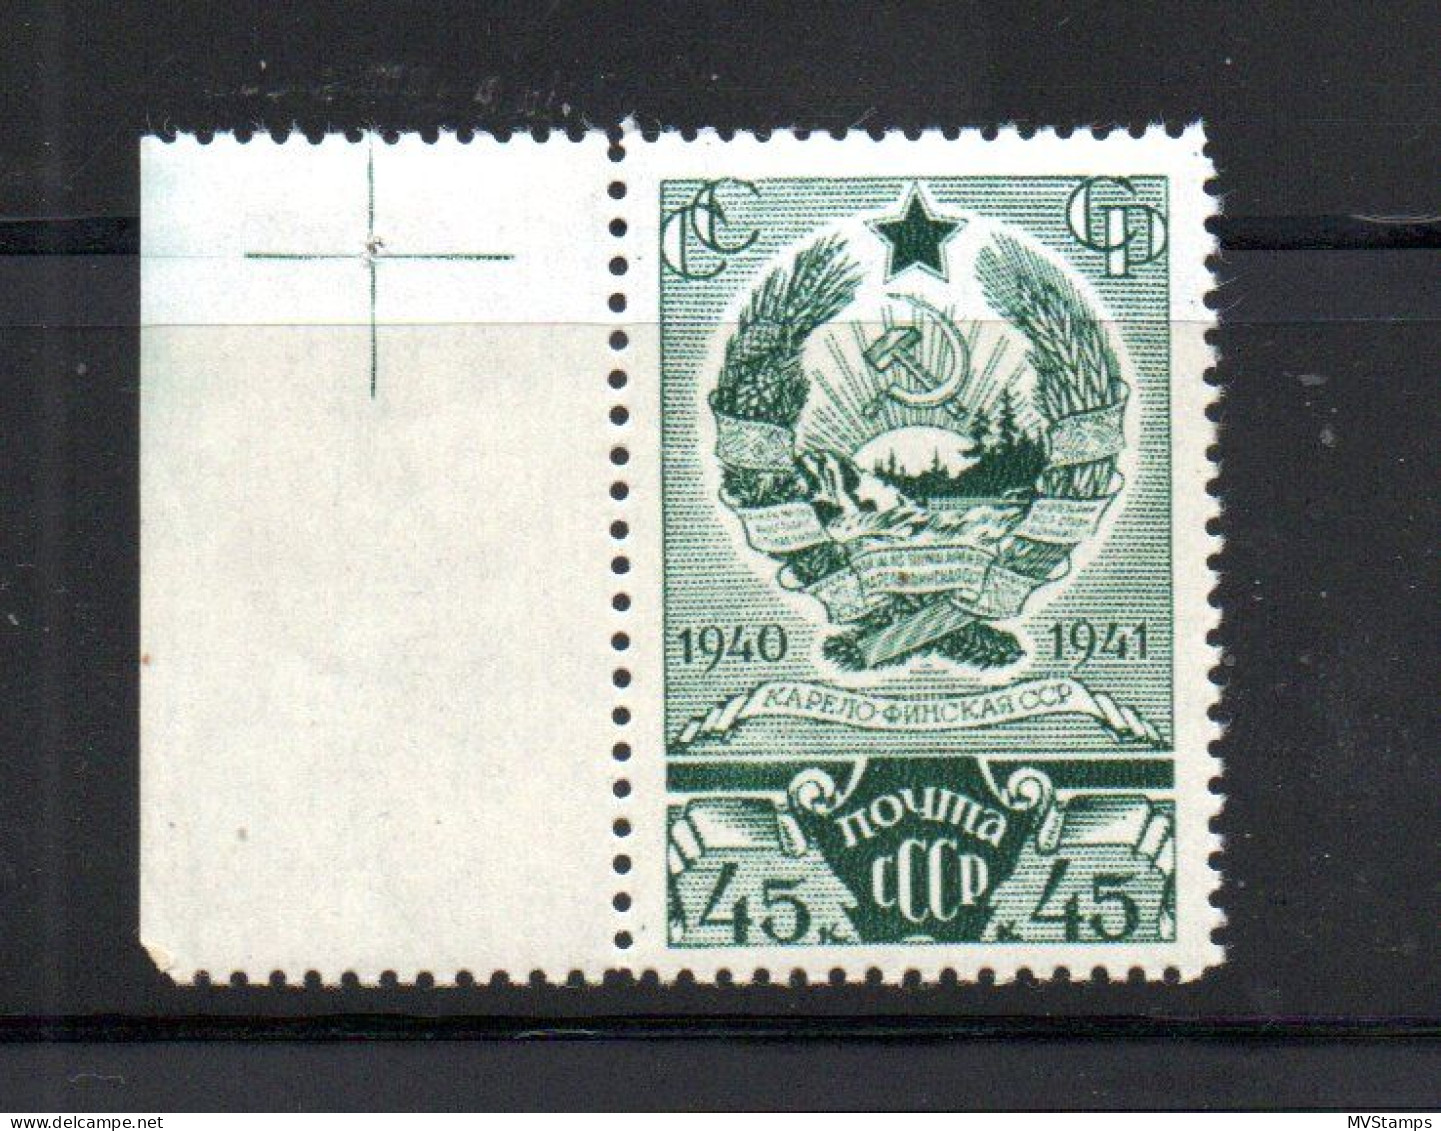 Russia 1941 Old Carelia Coat Of Arms Stamp (Michel 811) MNH - Neufs